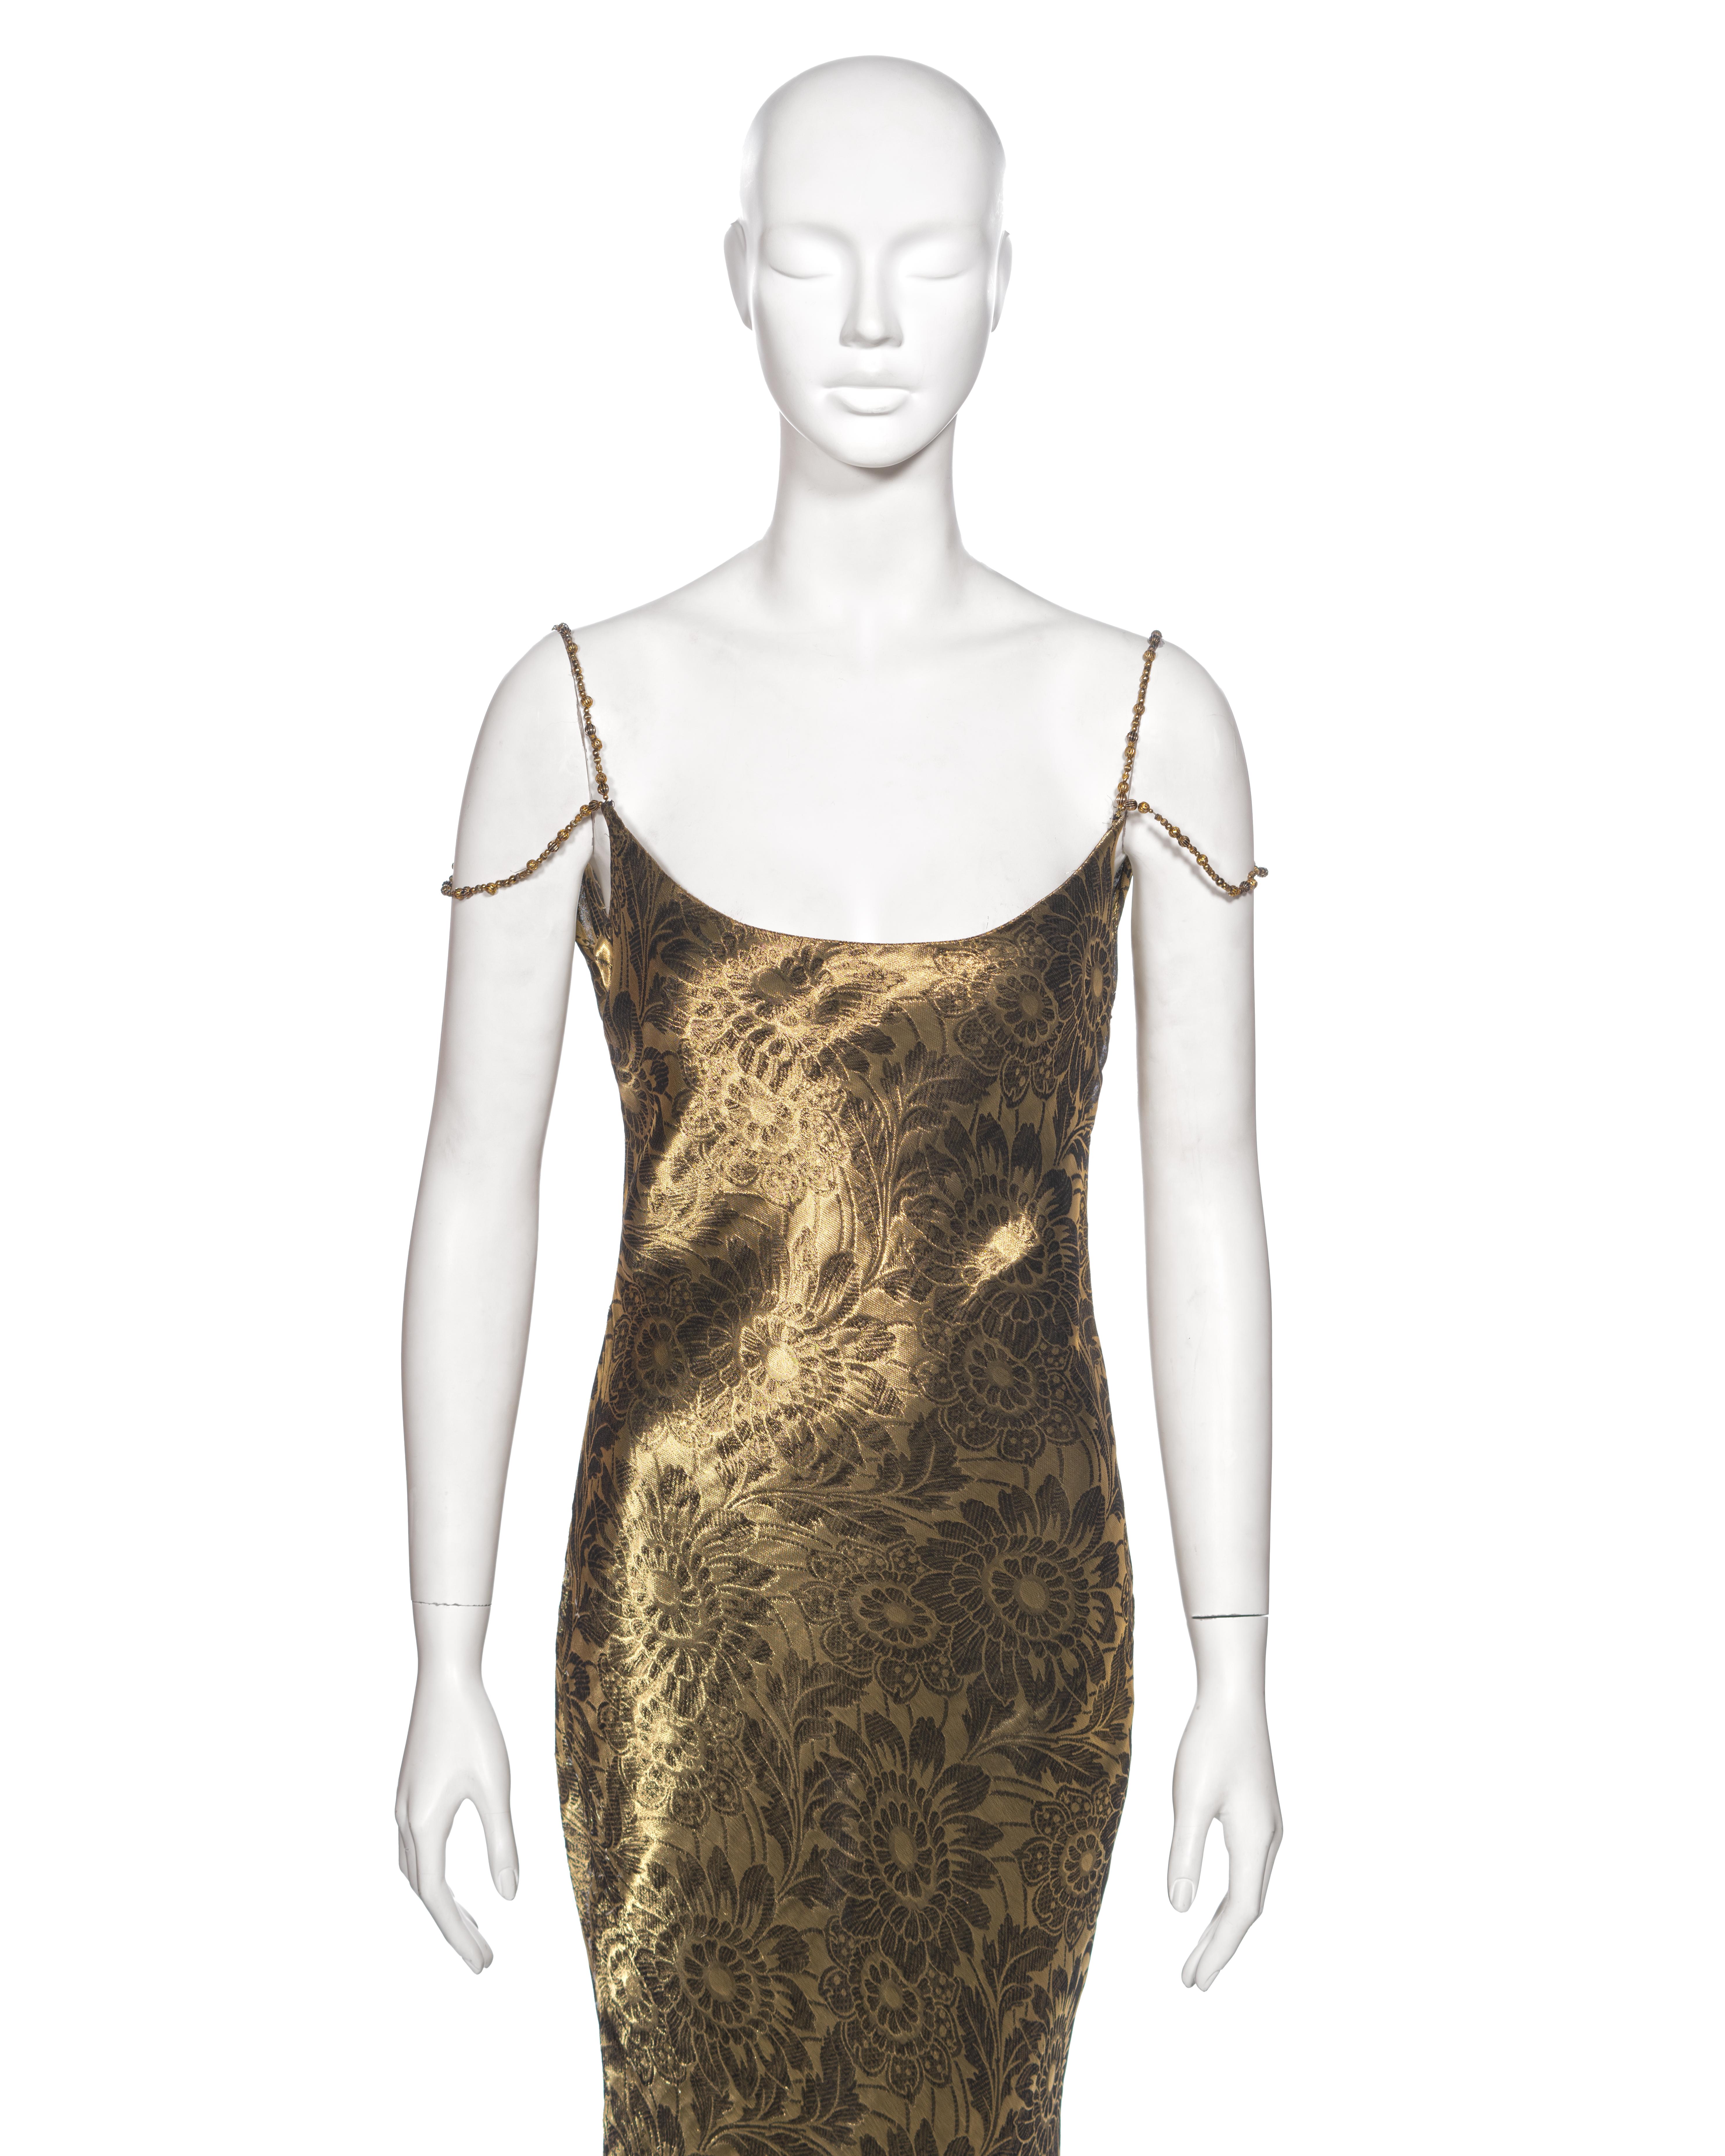 Christian Dior by John Galliano Metallic Antique Gold Evening Dress, FW 1998 In Good Condition For Sale In London, GB